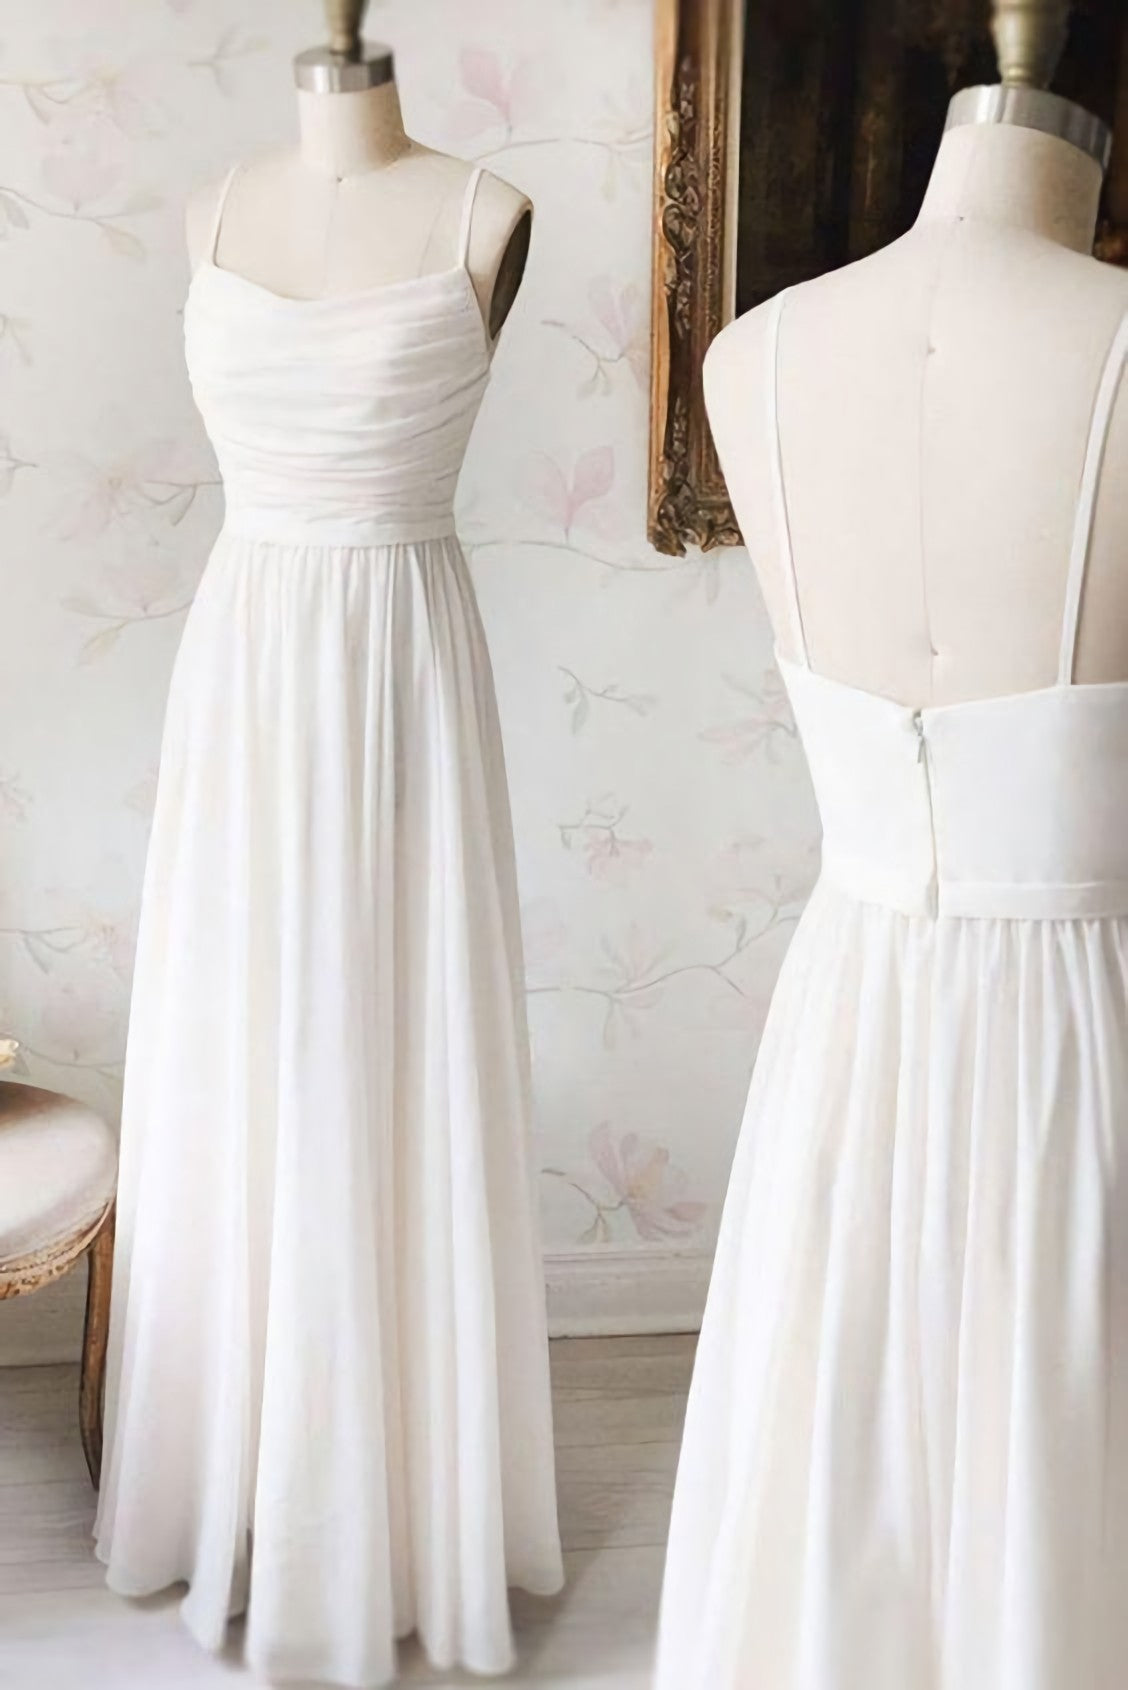 Simple White Chiffon V Neck Long Corset Prom Dress, White Evening Dress outfit, Homecomming Dresses Lace